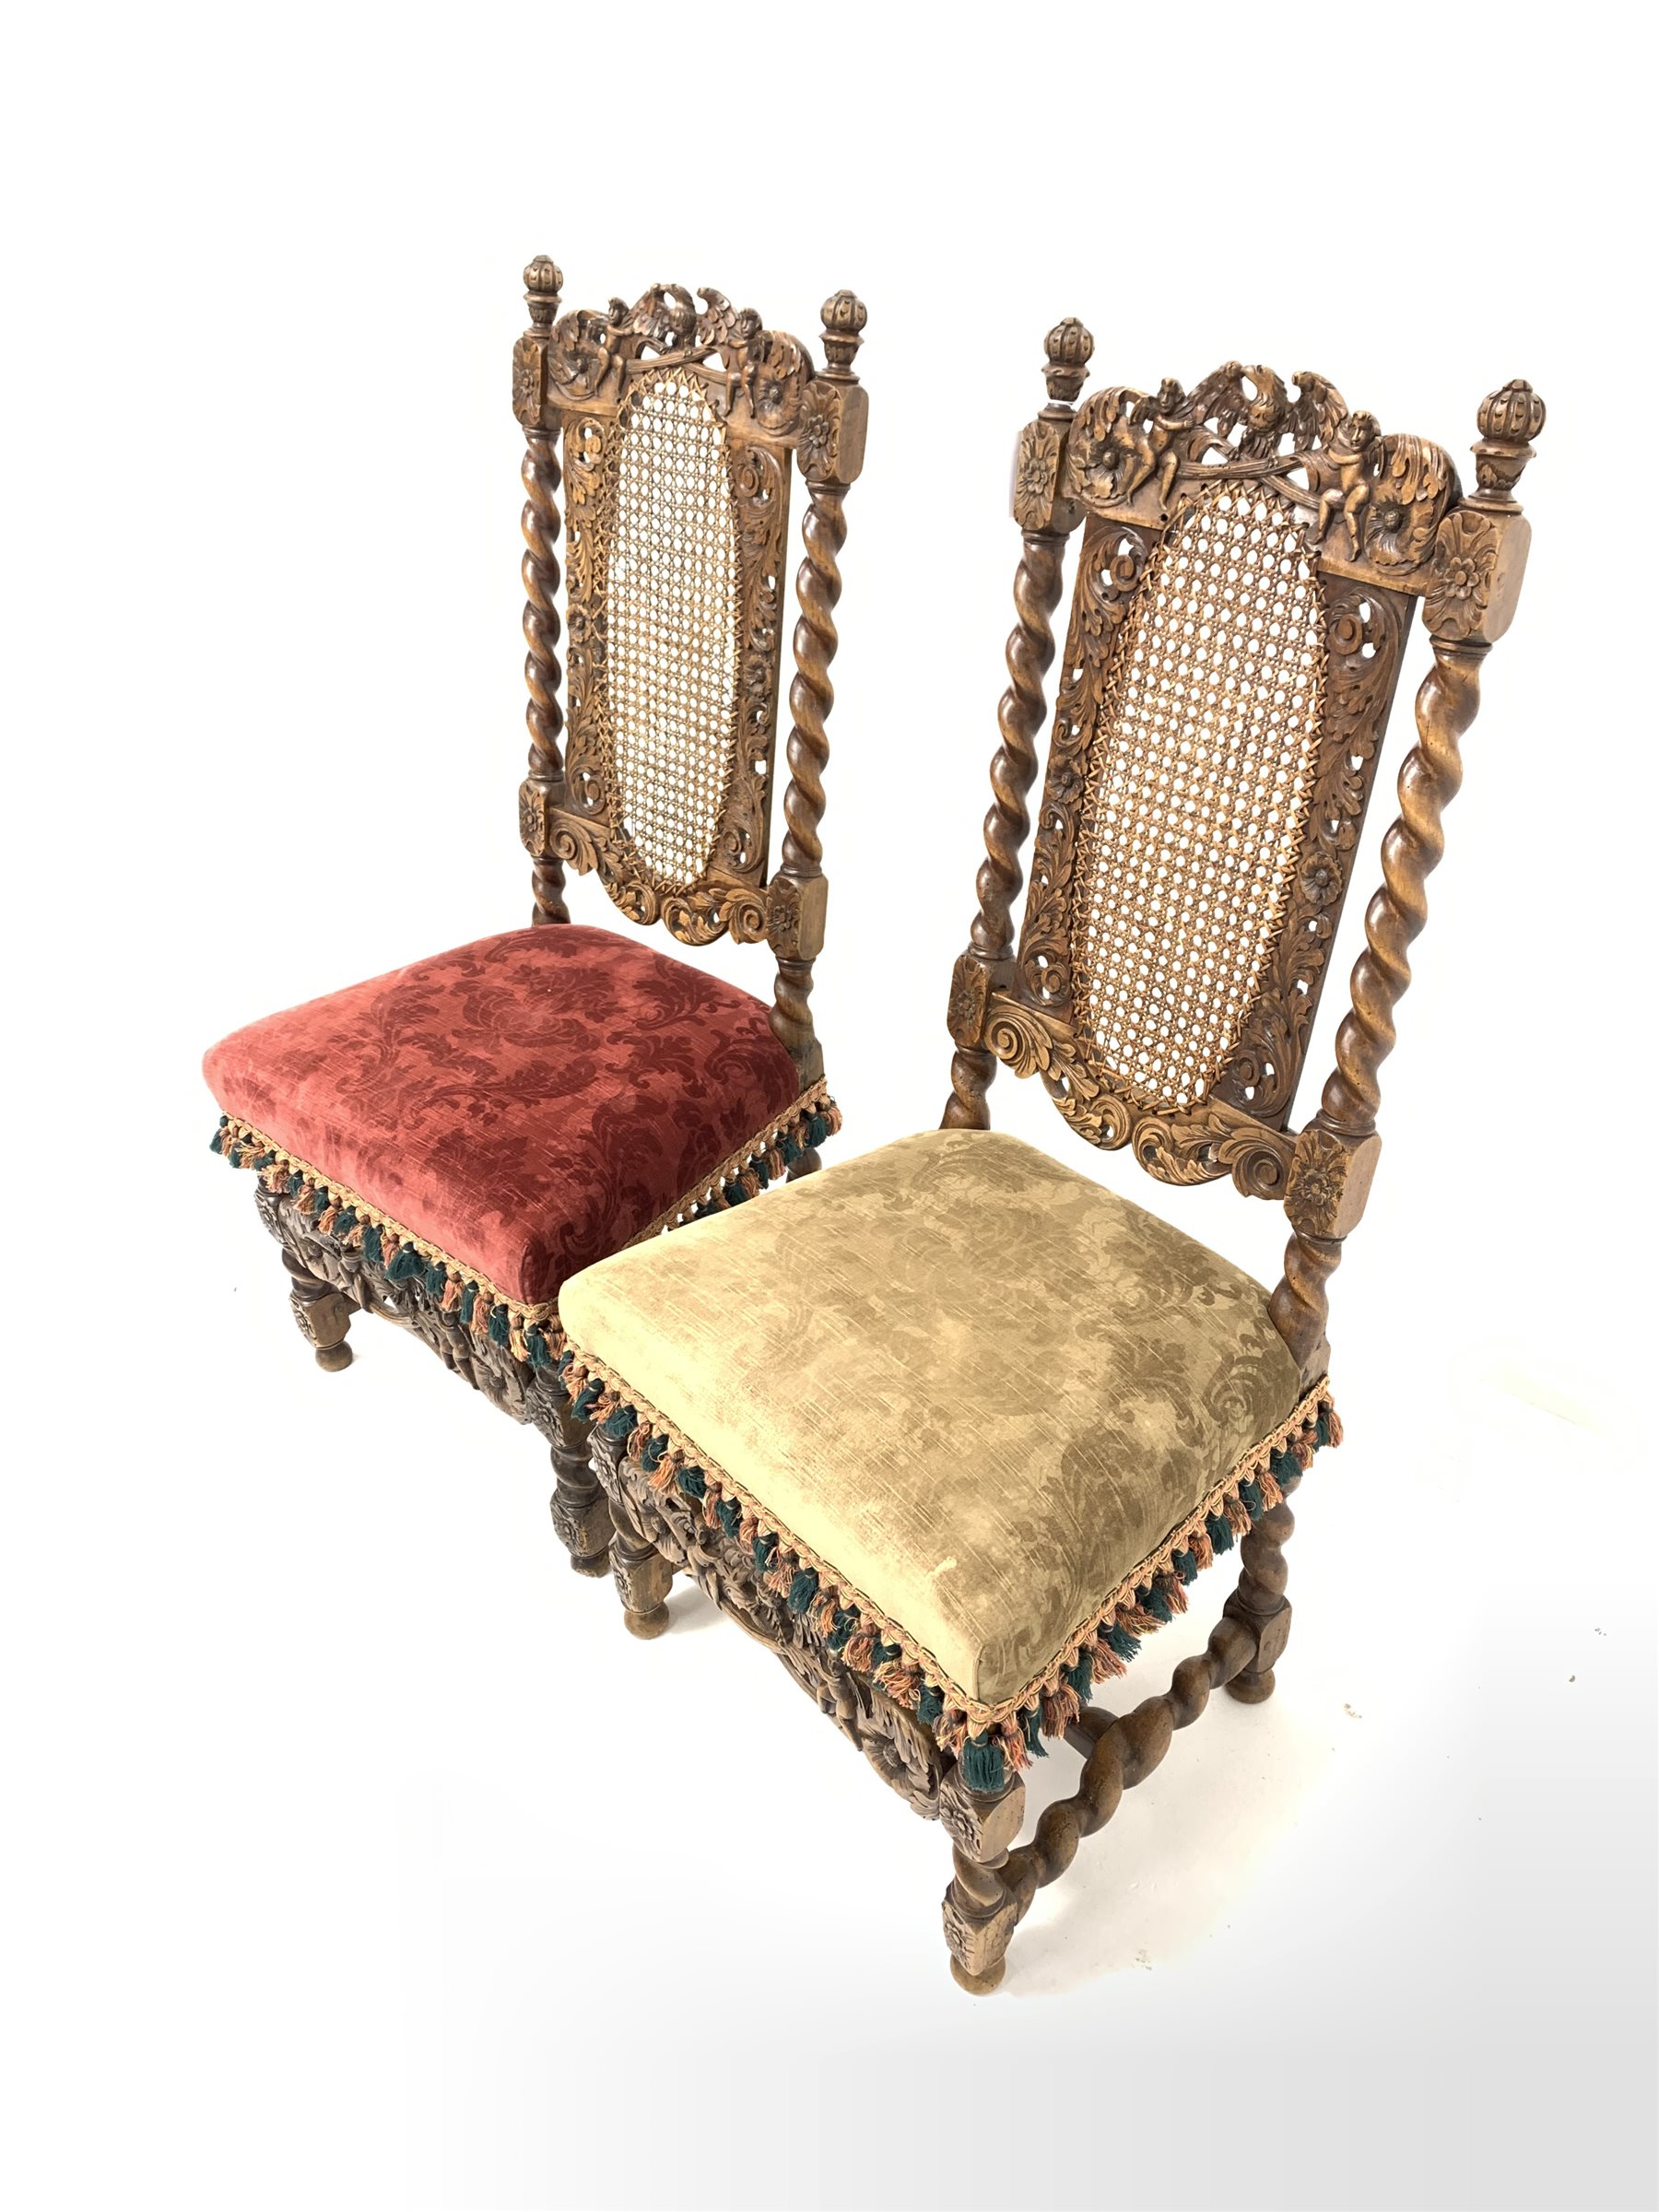 Pair of 19th century Carolean style walnut chairs - Image 3 of 5